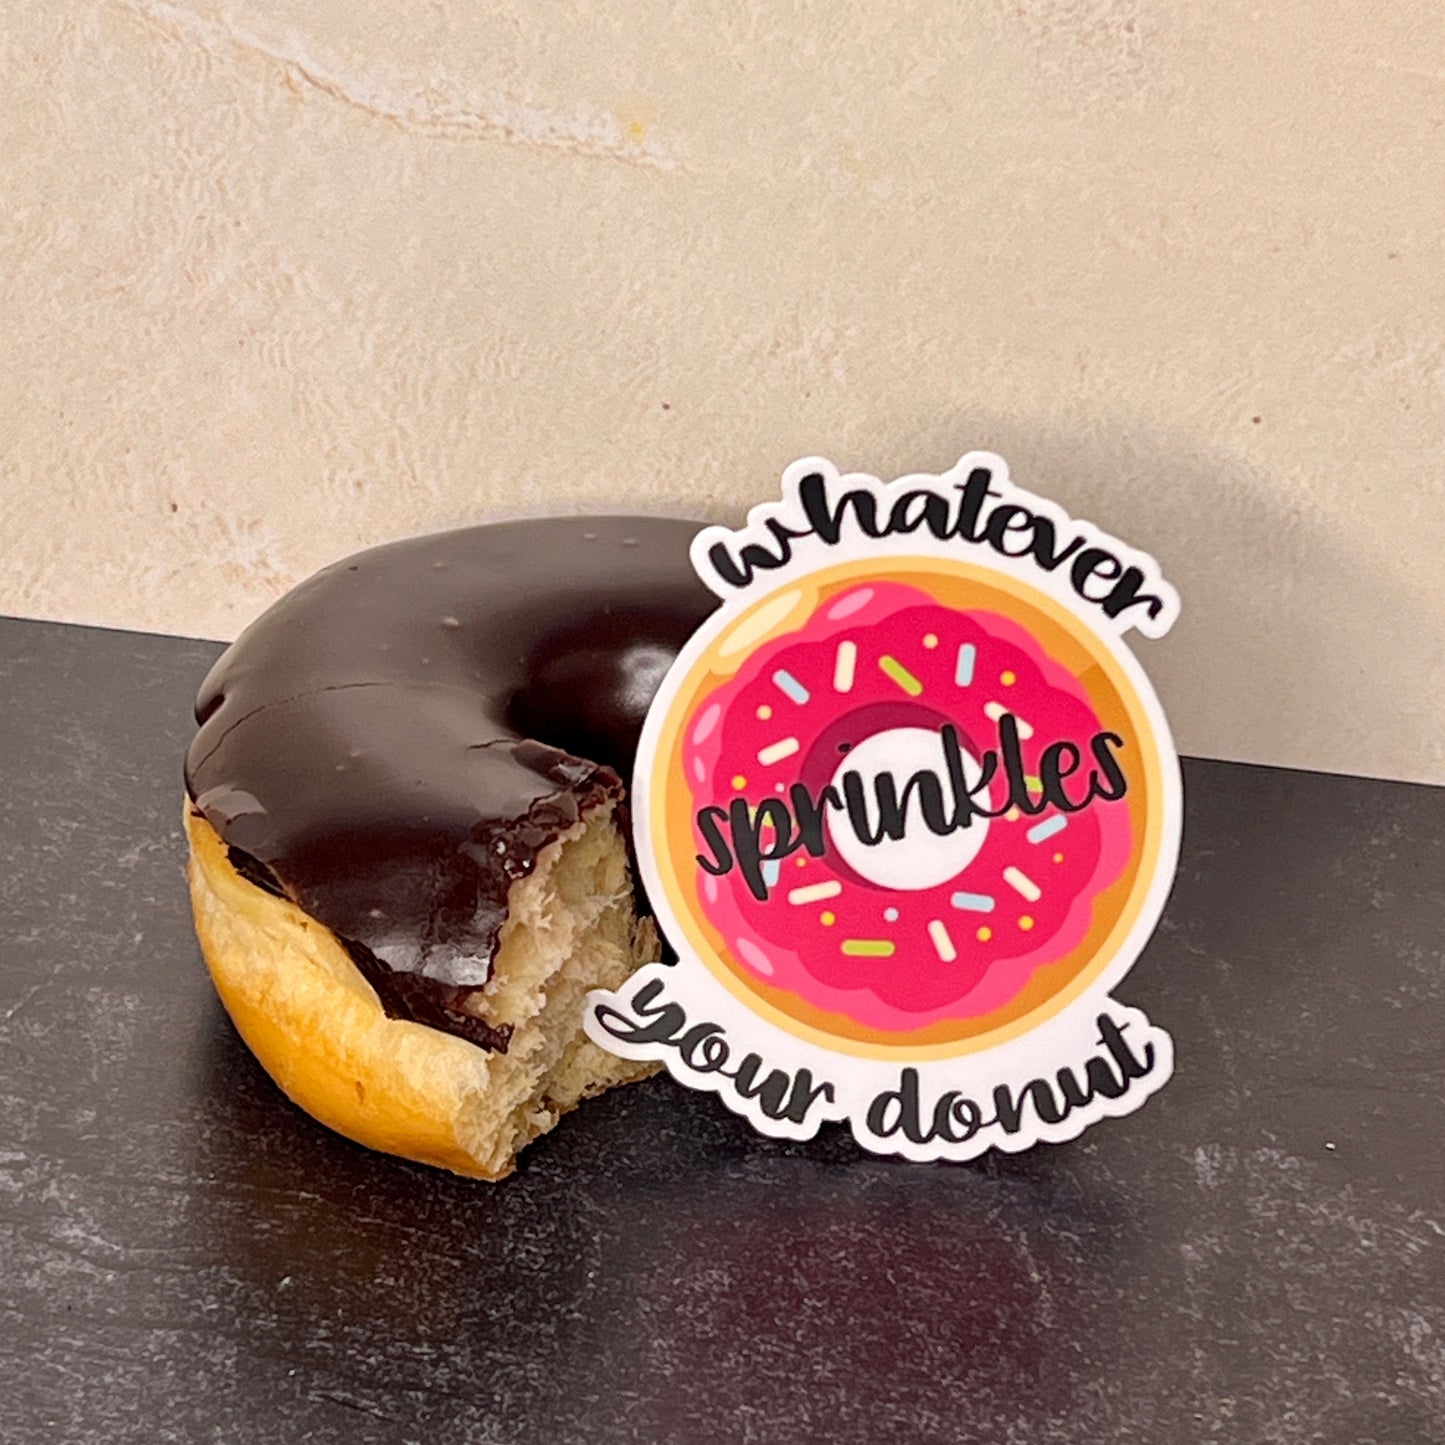 "Whatever Sprinkles Your Donut" Waterproof Sticker Decal